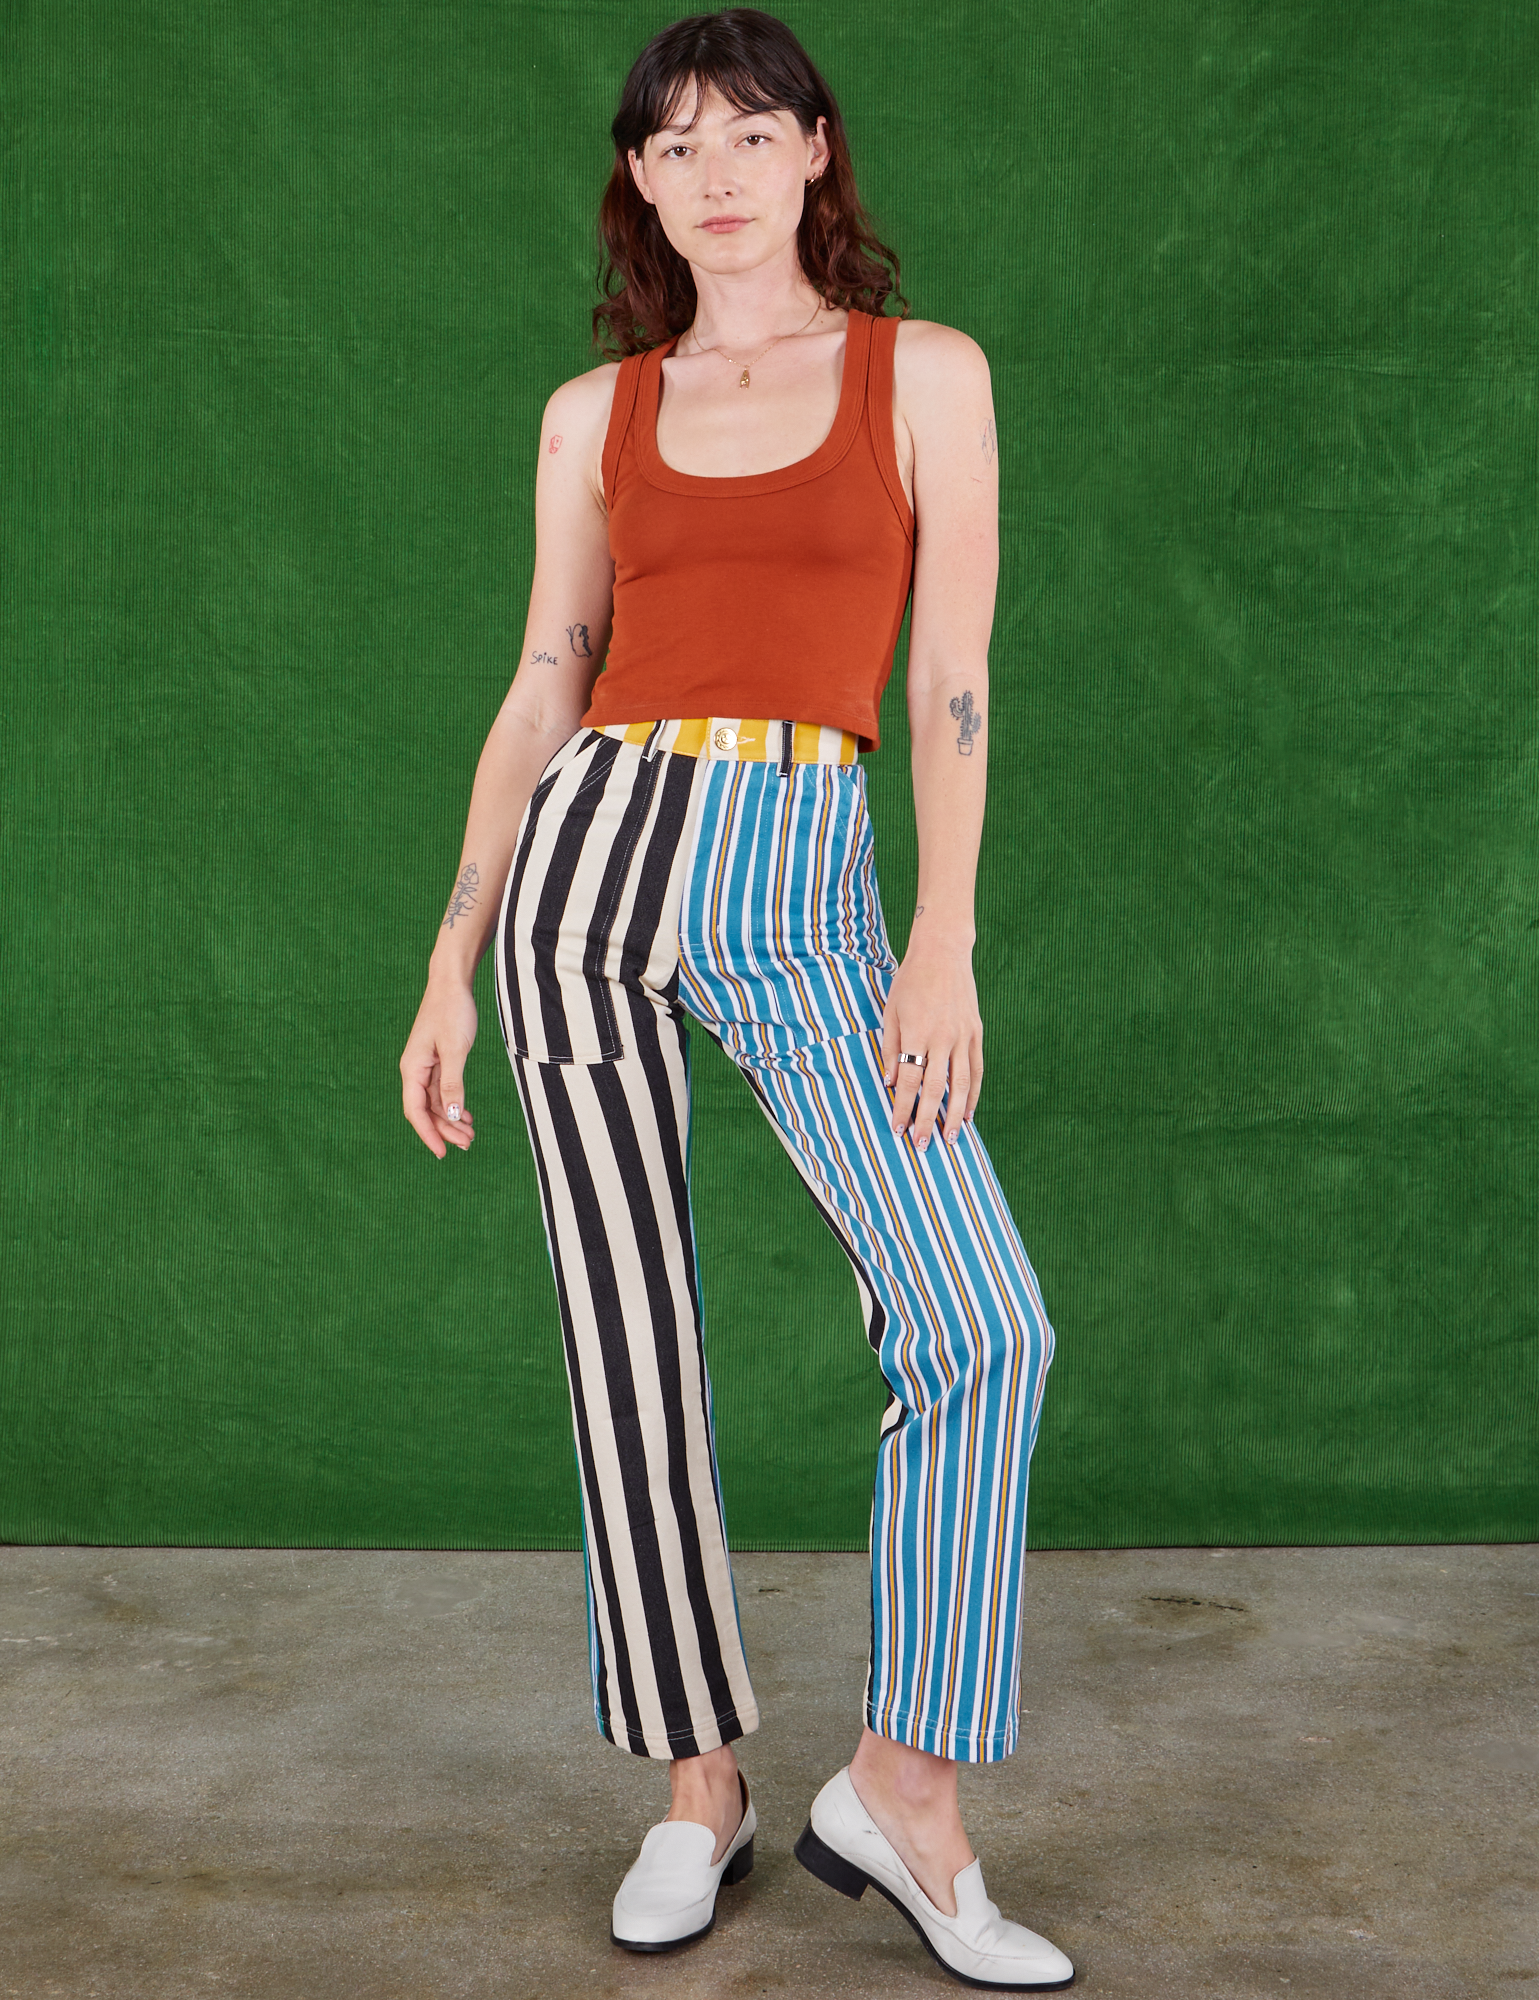 Alex is 5'8" and wearing XS Mismatched Stripe Work Pants paired with burnt terracotta Cropped Tank Top